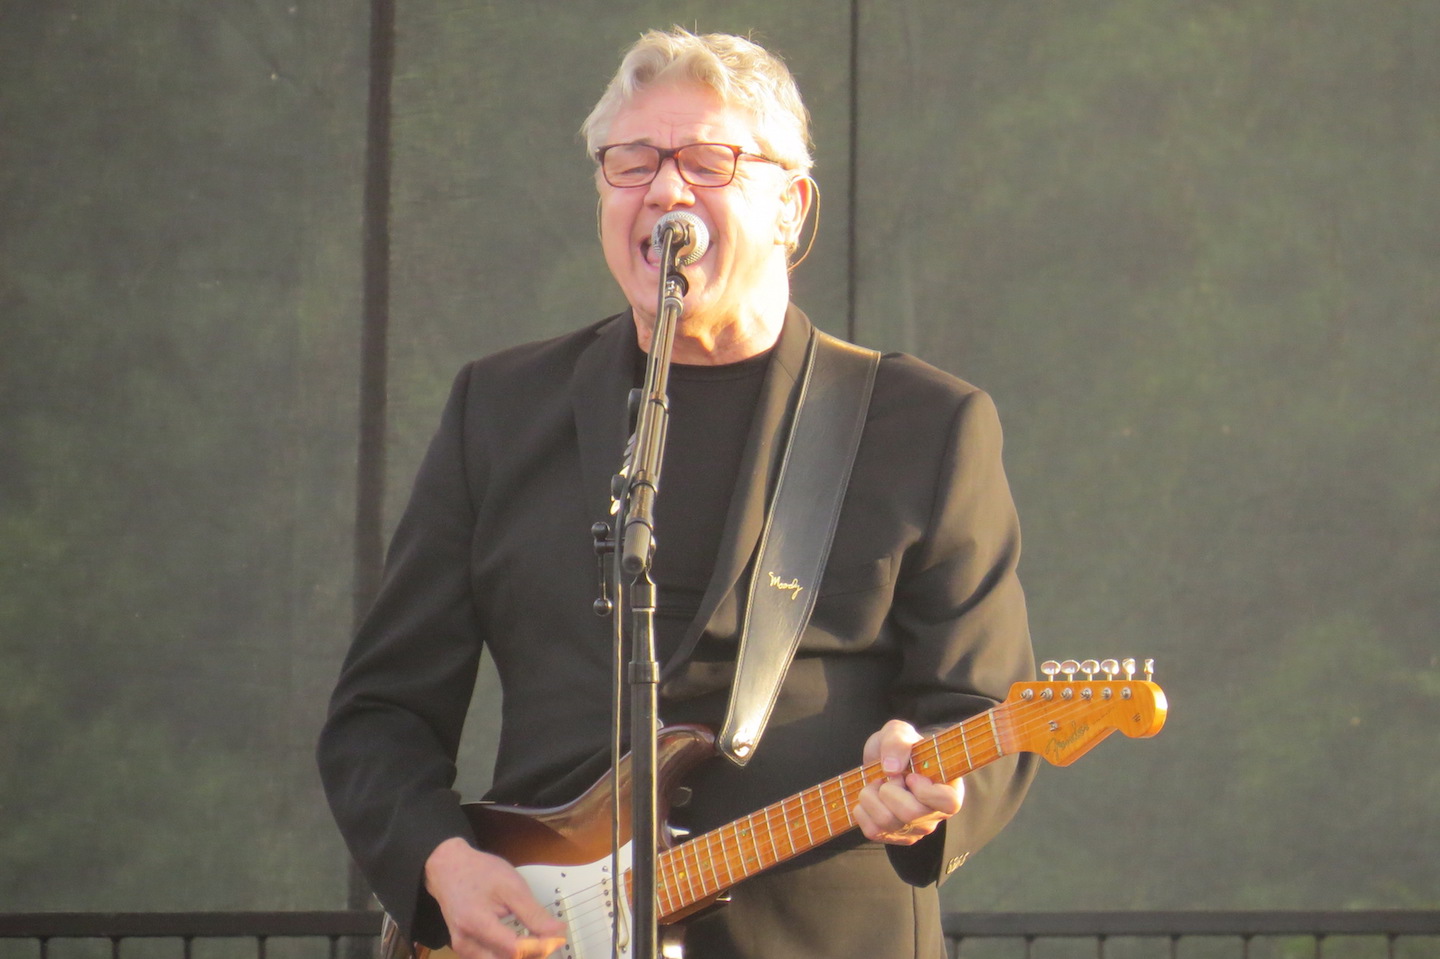 Steve Miller performs at Artpark. (Photos and video by Joshua Maloni)